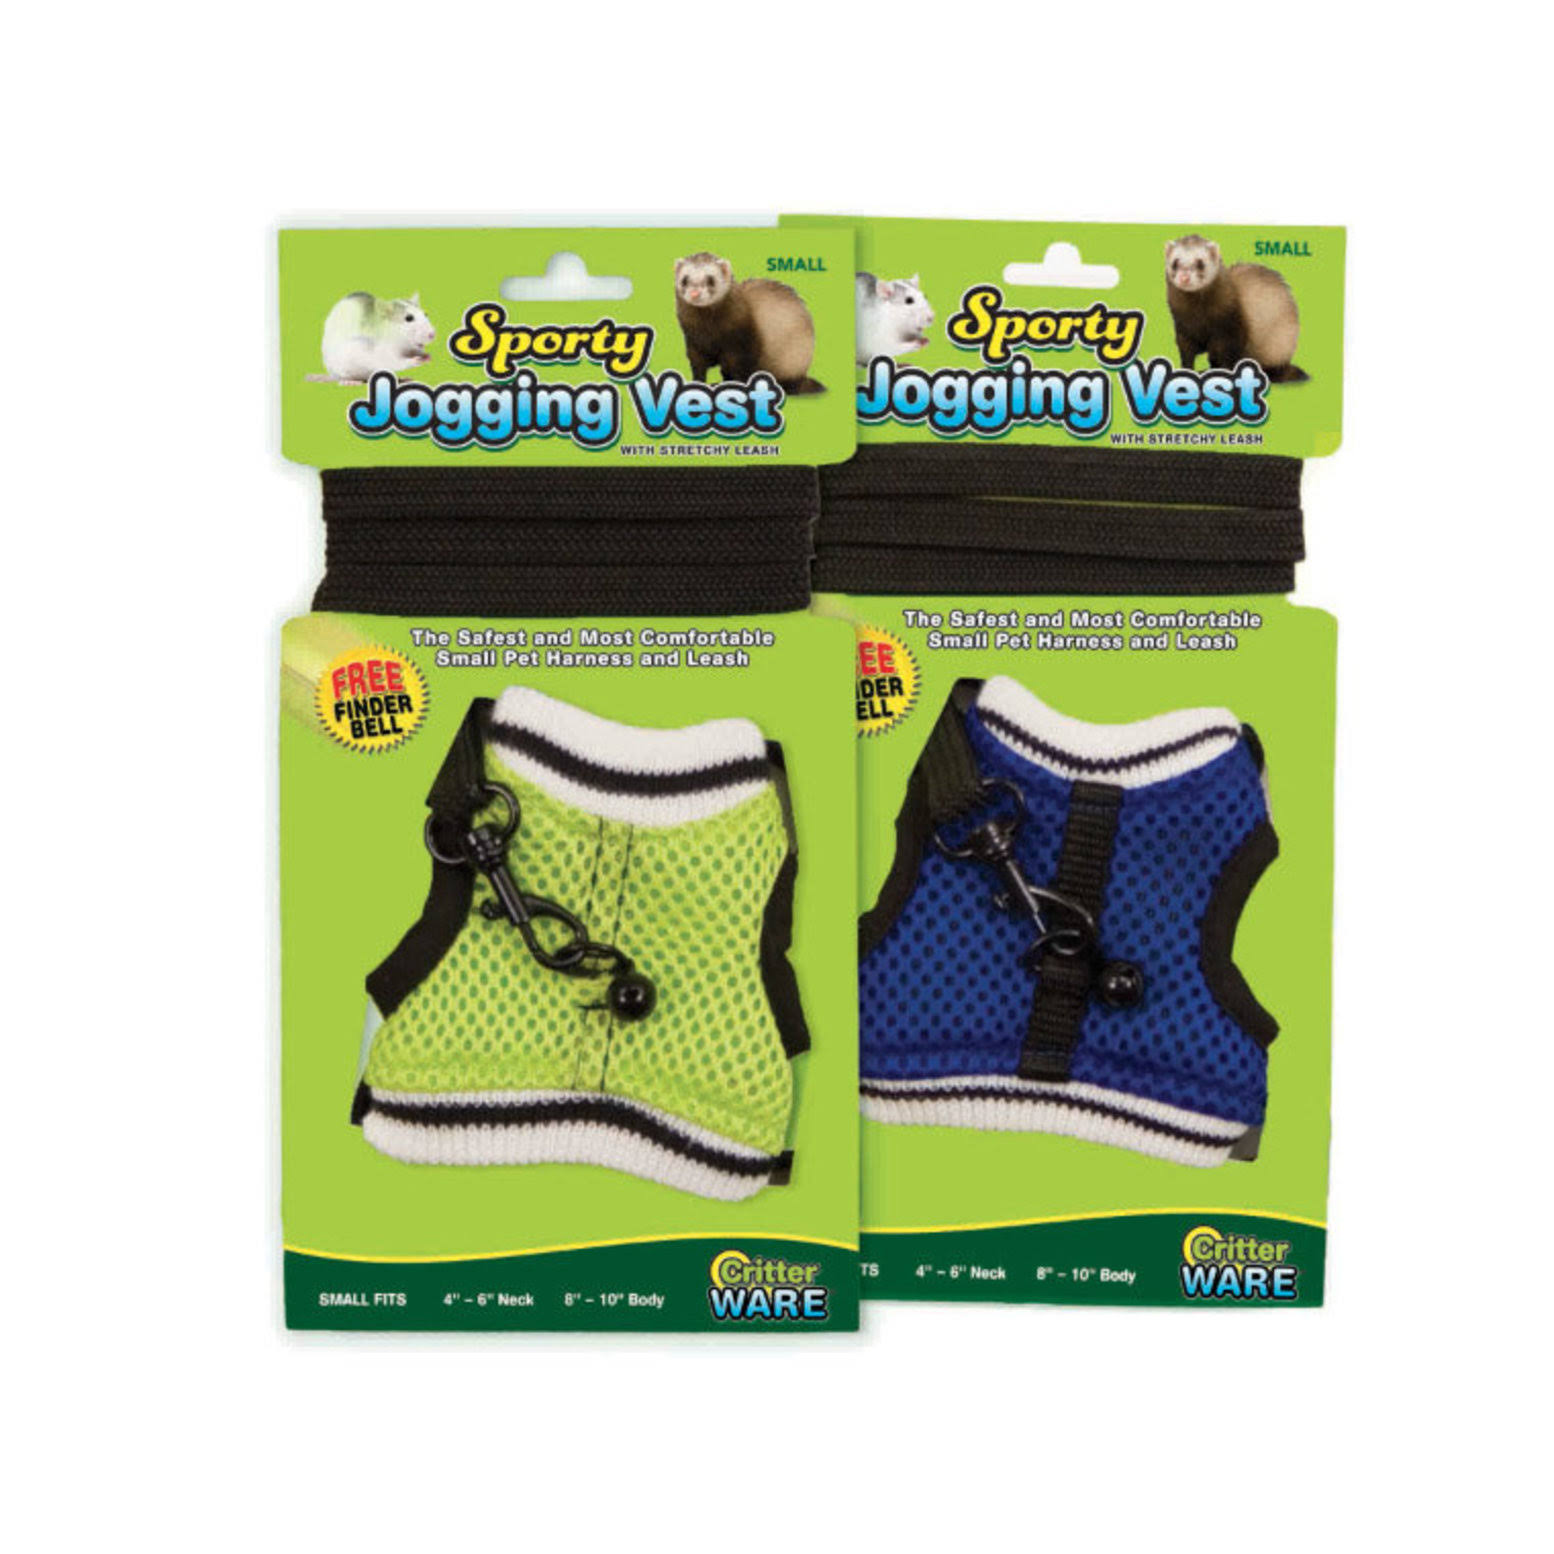 Ware Manufacturing Nylon Walk-n-vest Pet Harness and Leash